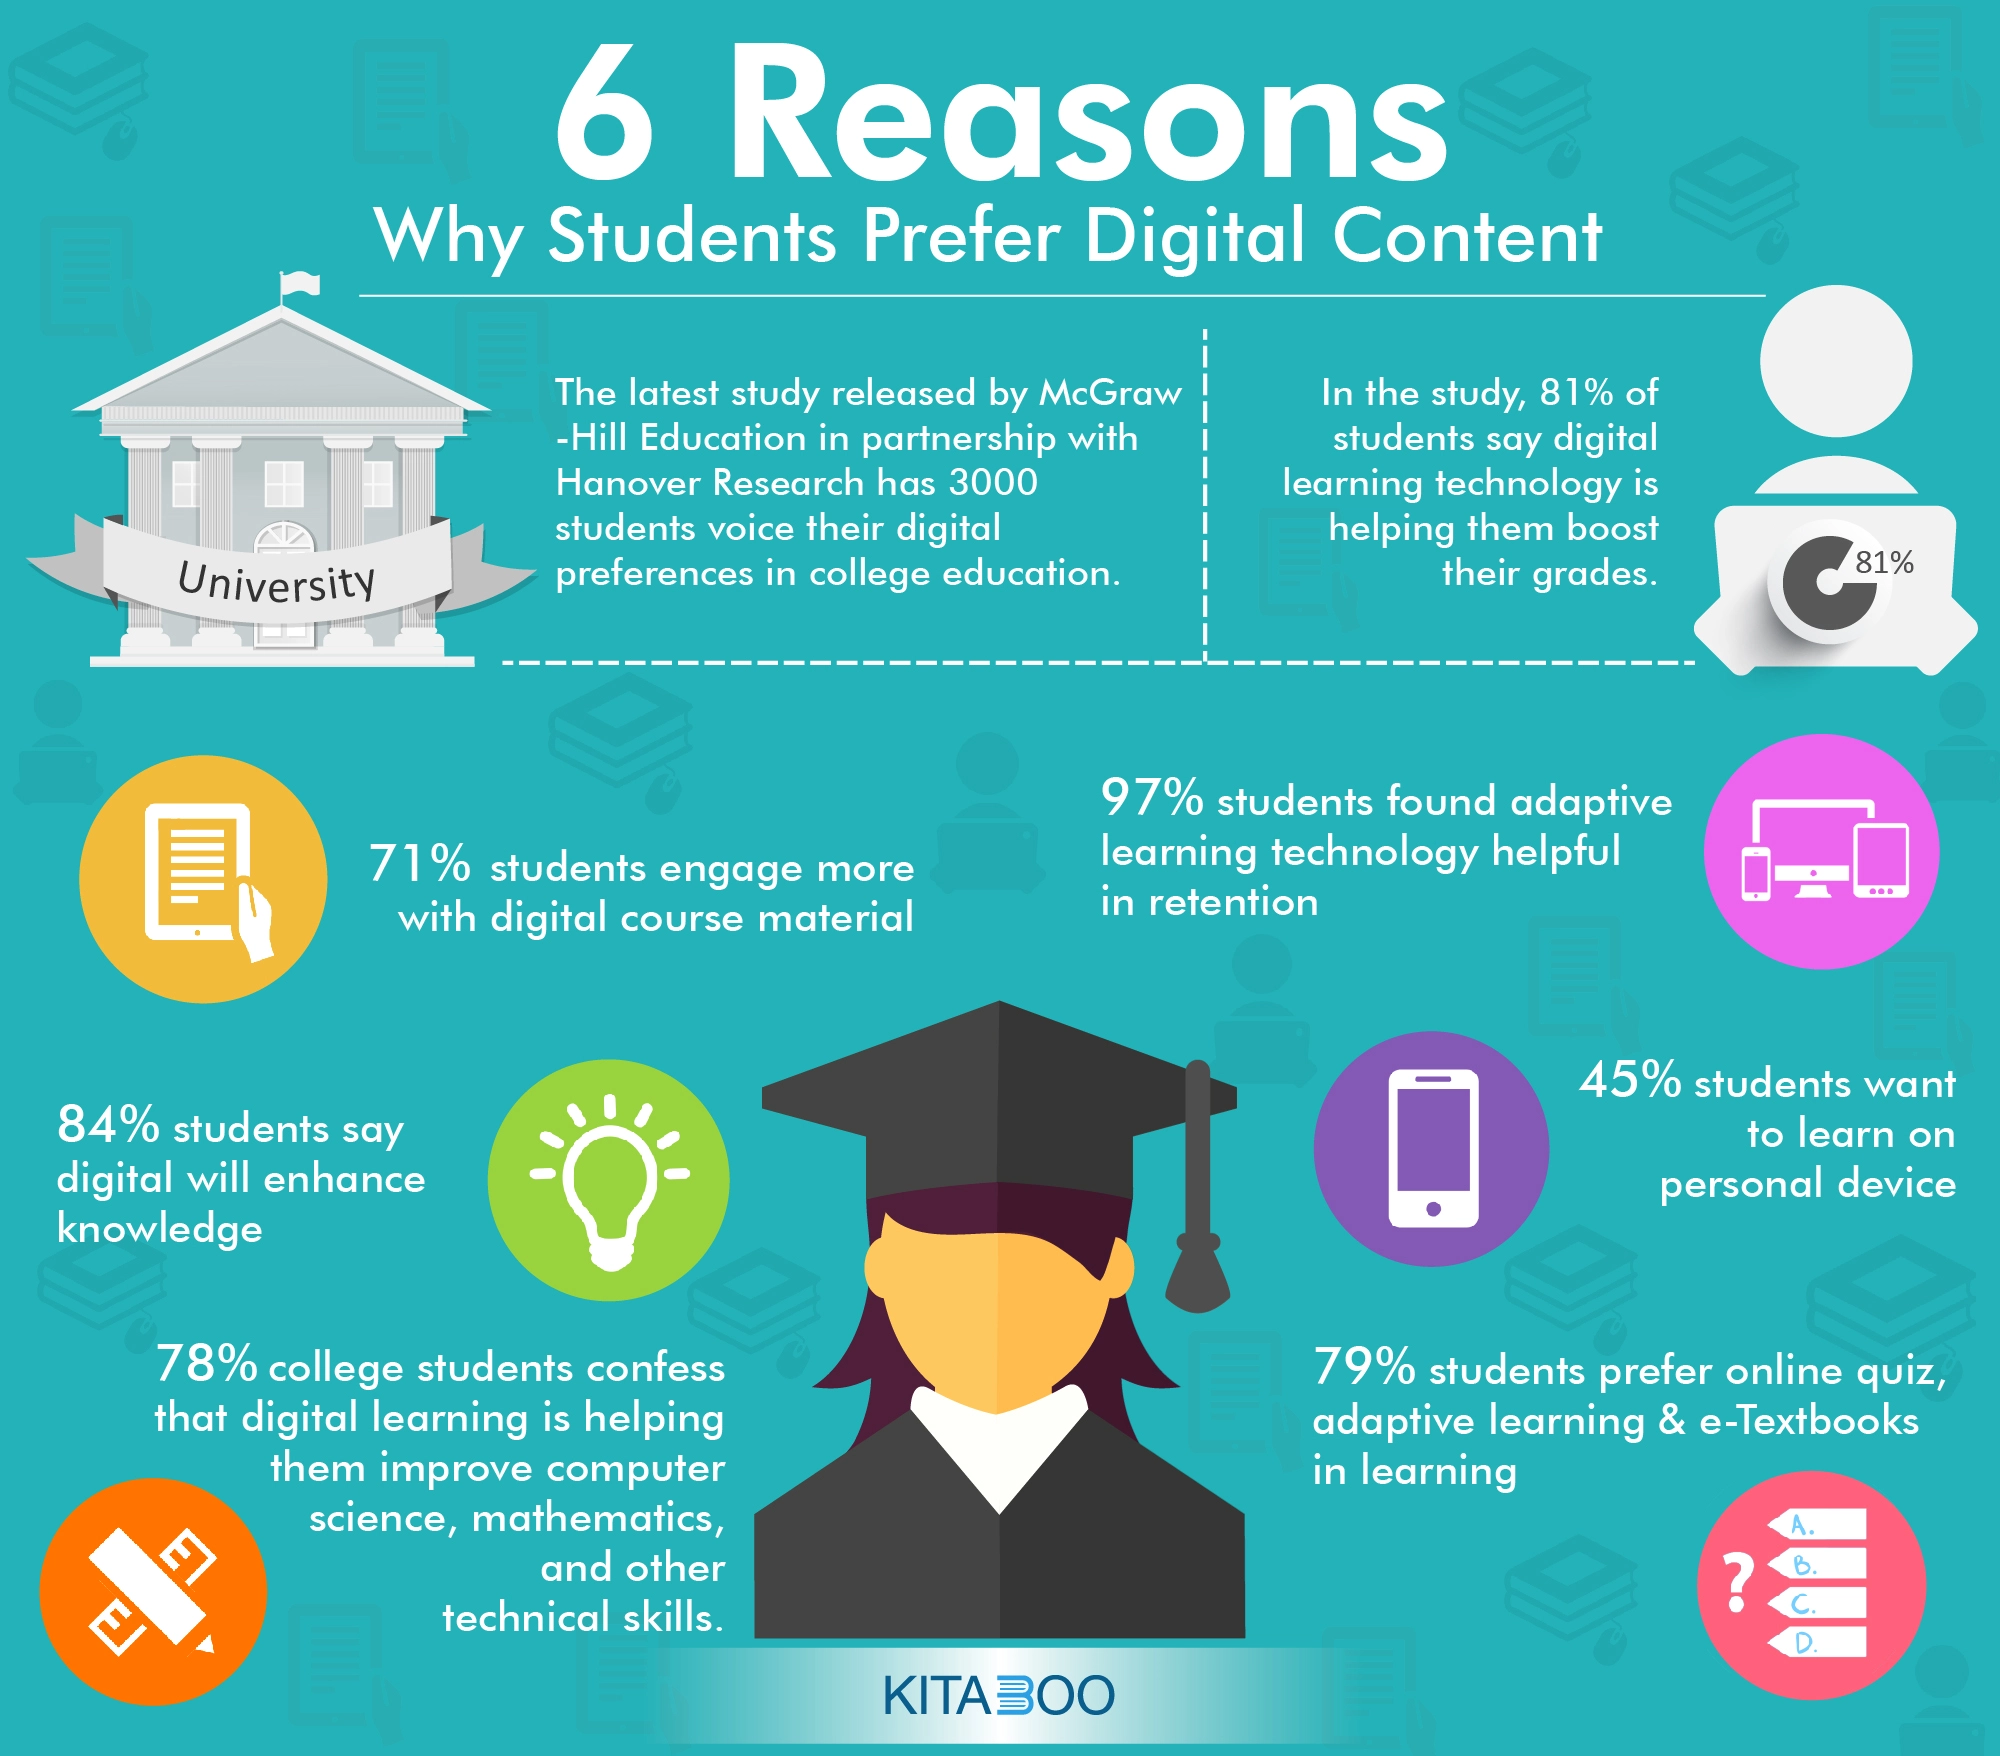 6 Reasons Why Students Prefer Digital Content infographic